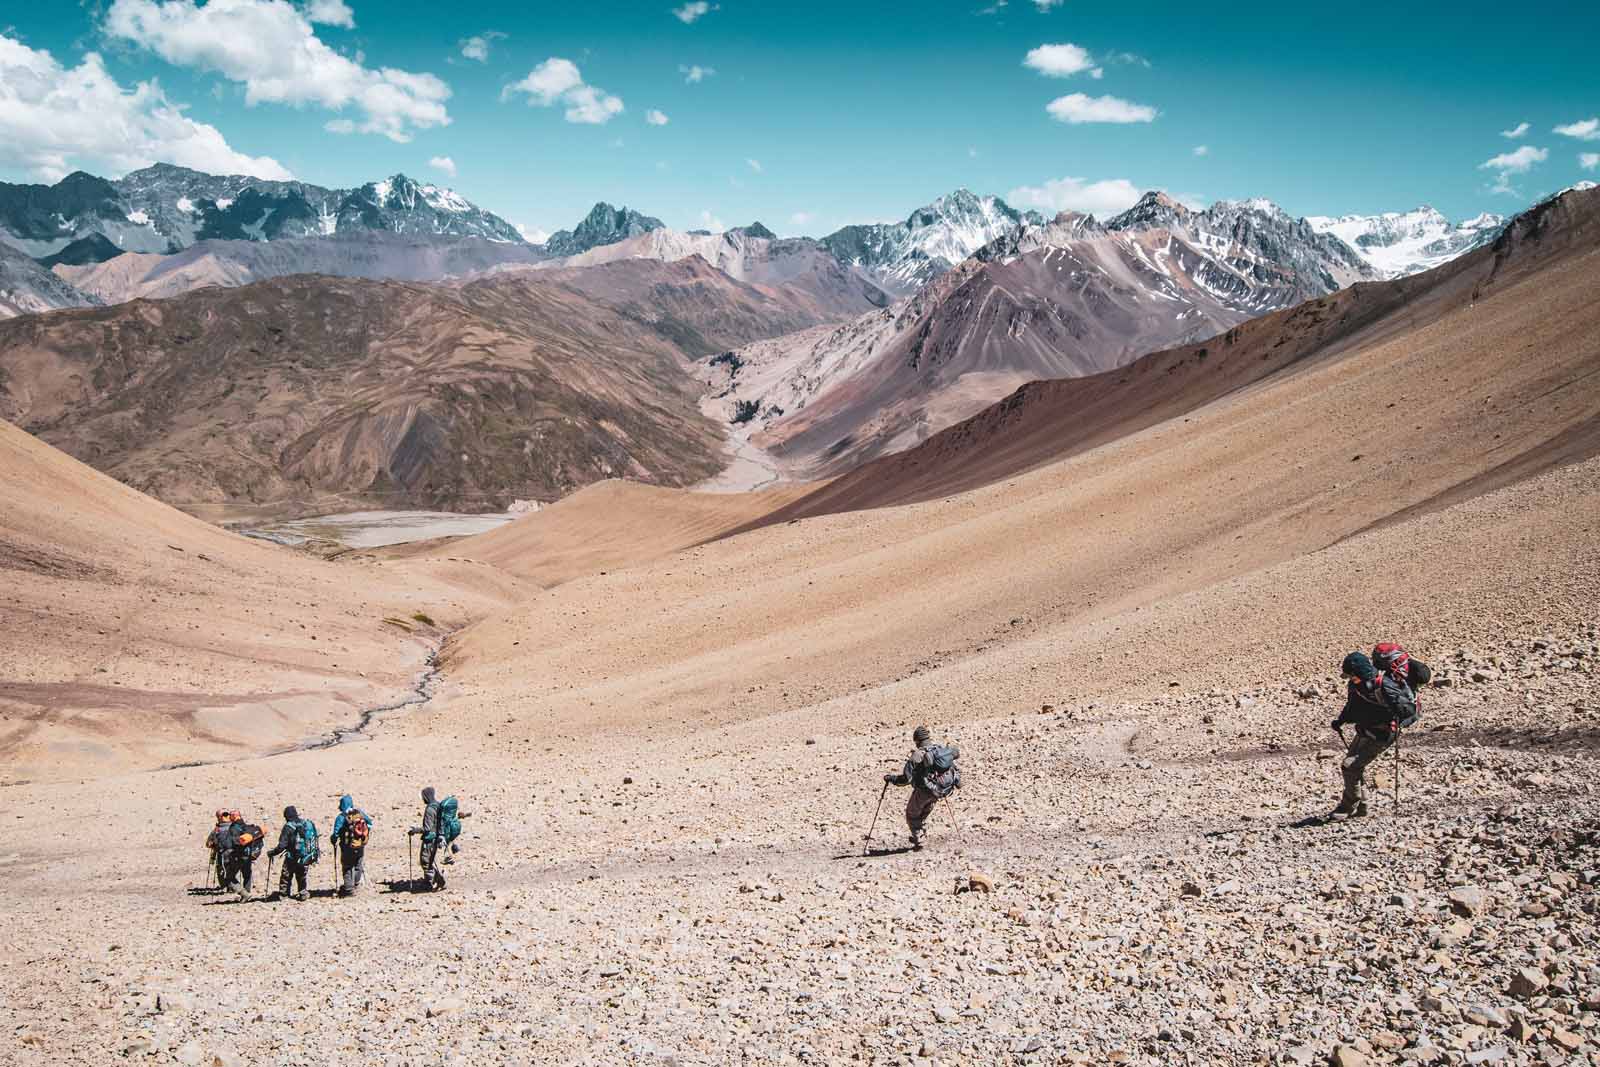 Hikers make their way down the Piuquenes Pass in the Andes